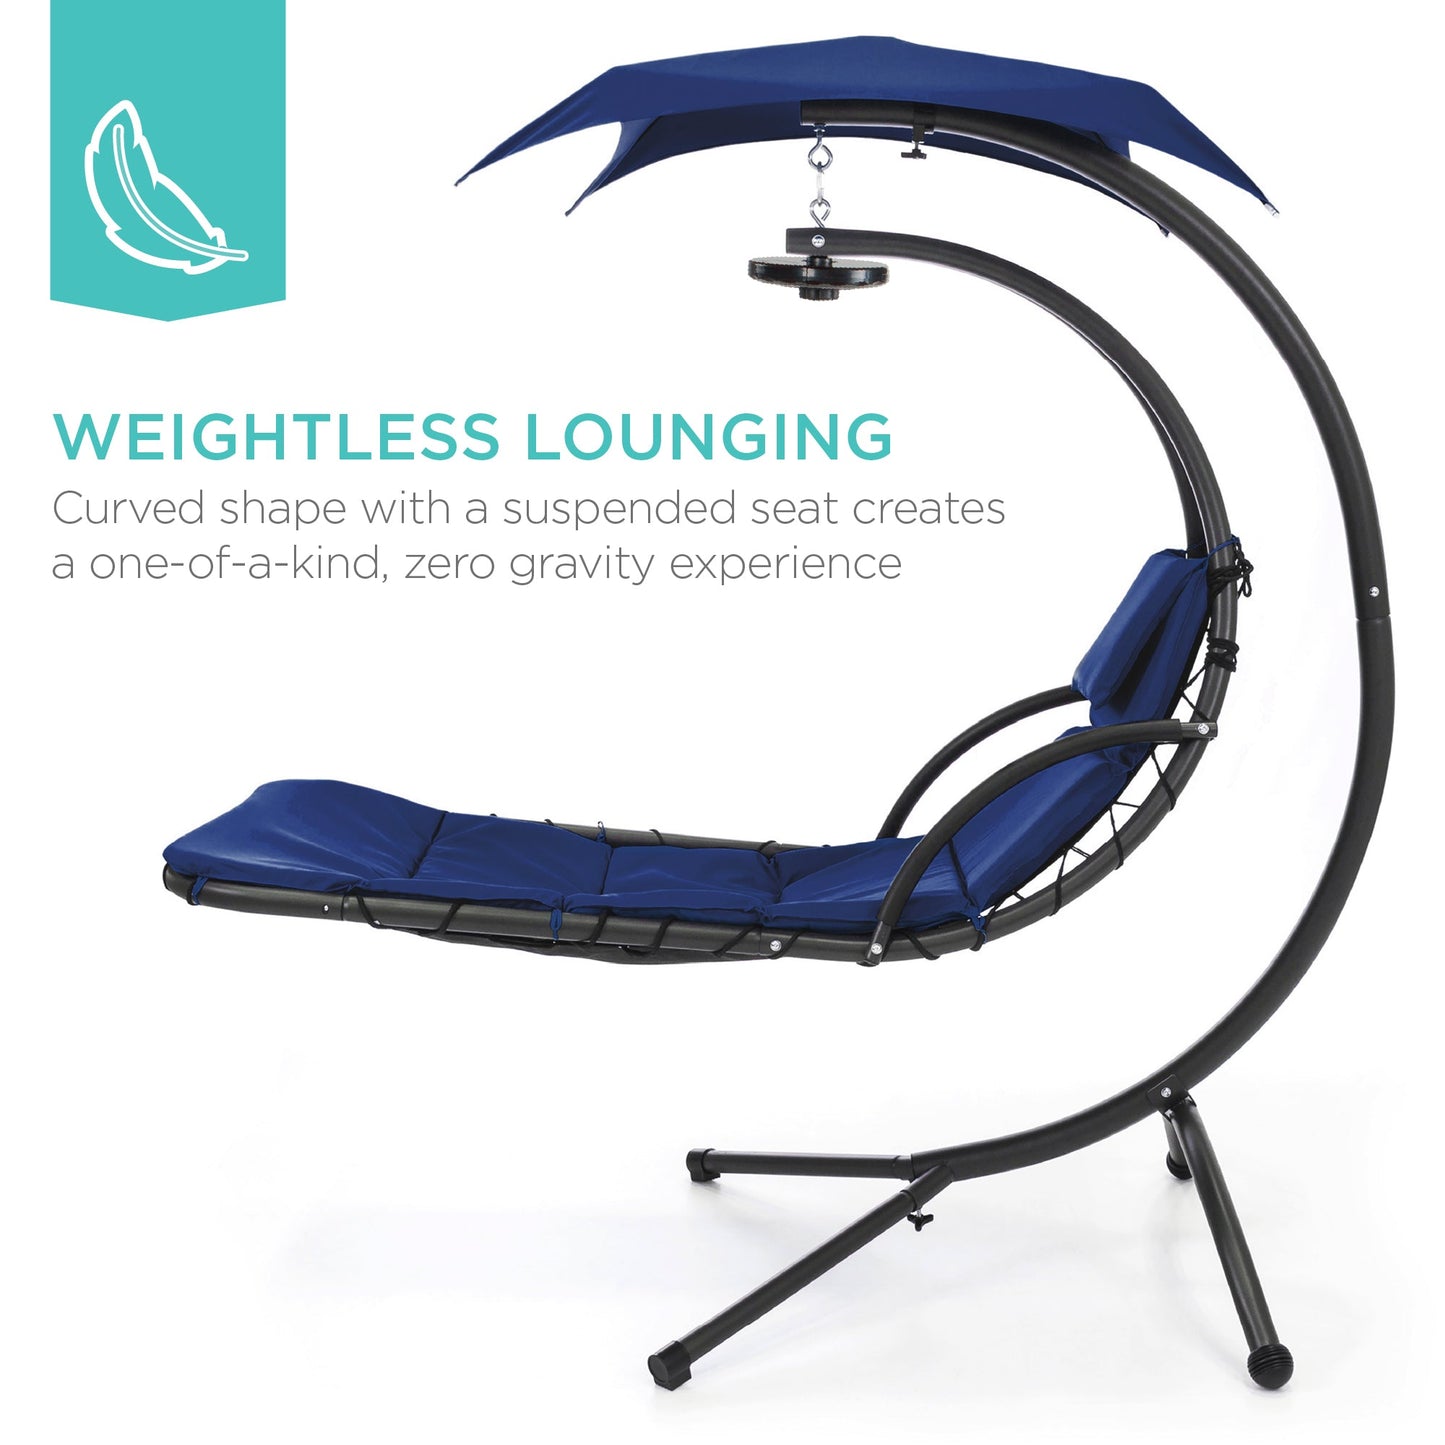 Hanging LED-Lit Curved Chaise Lounge Chair w/ Pillow, Canopy, Stand